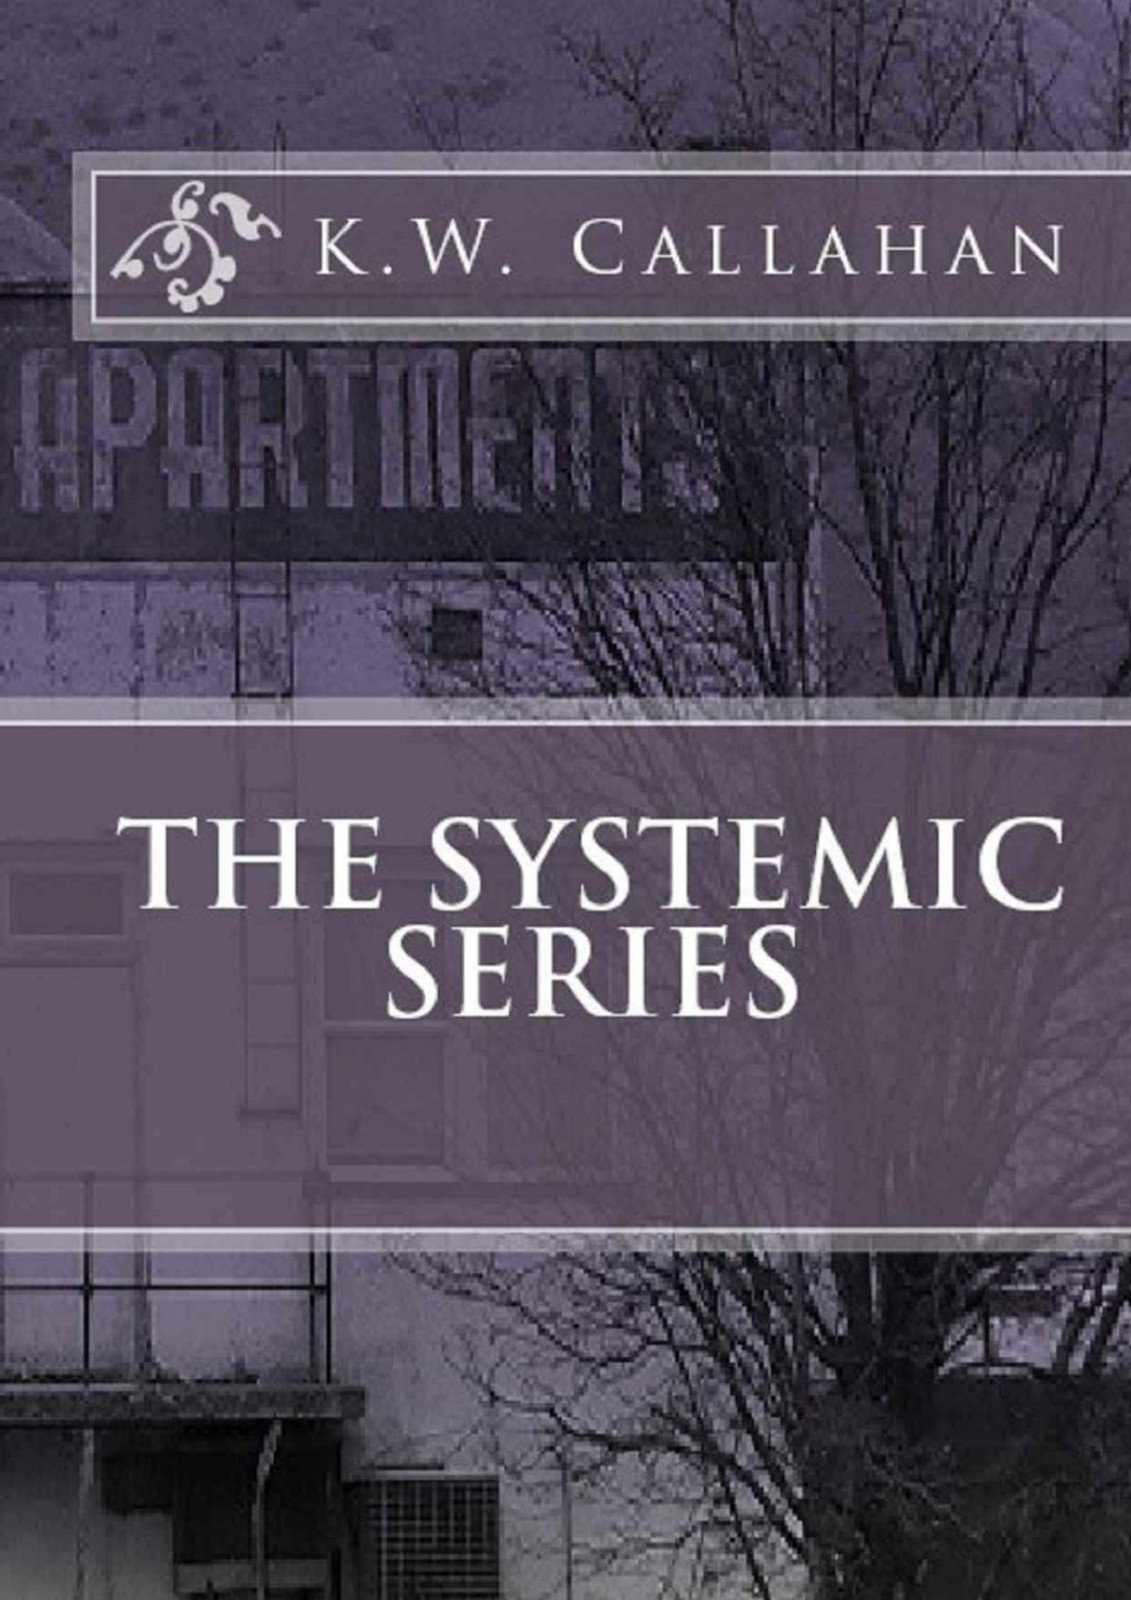 The Systemic Series